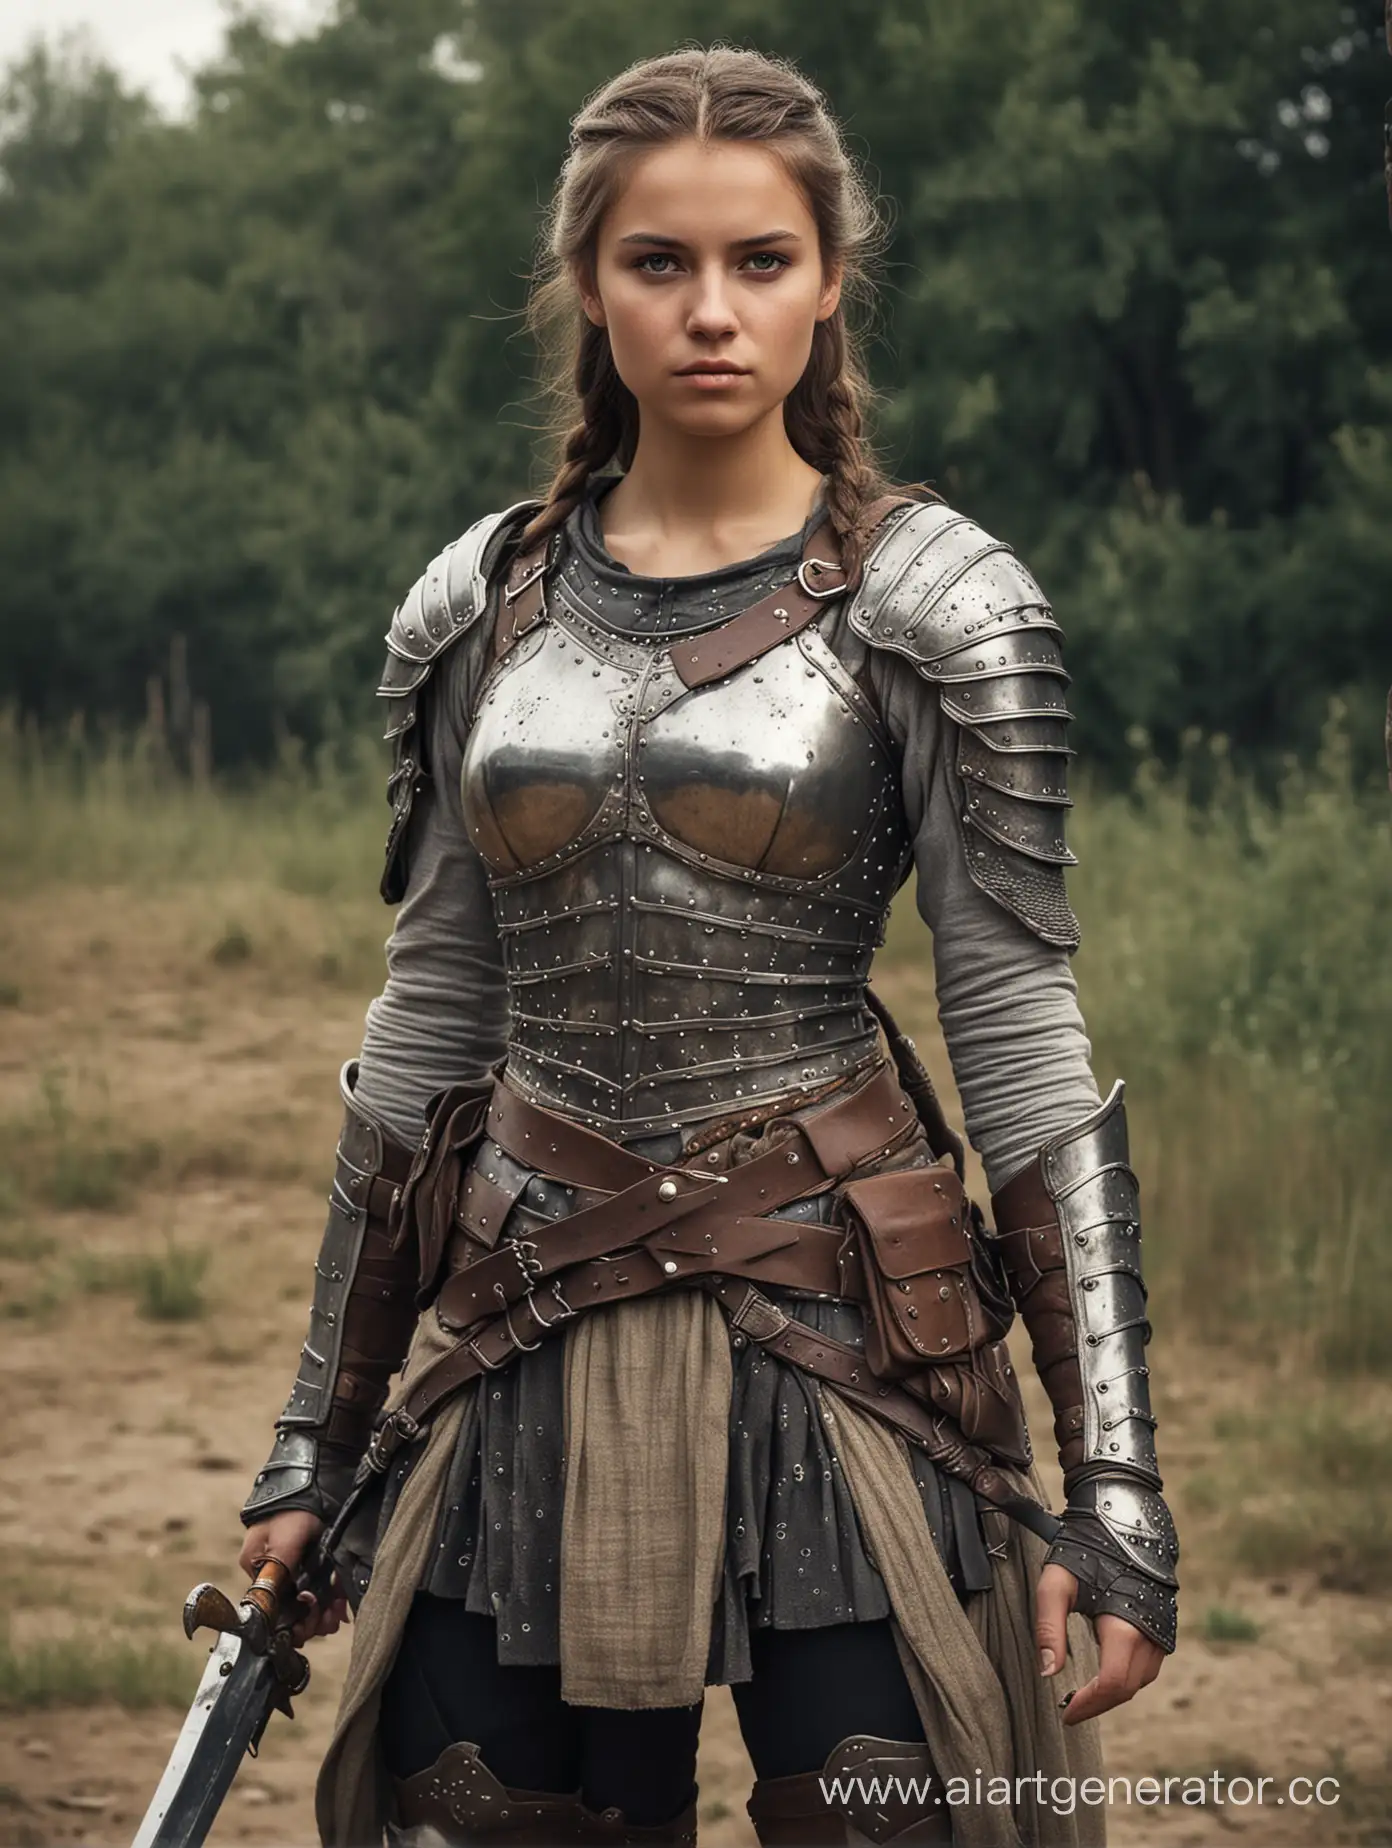 Young-Female-Medieval-Warrior-Rests-After-Battle-in-Weathered-Armor